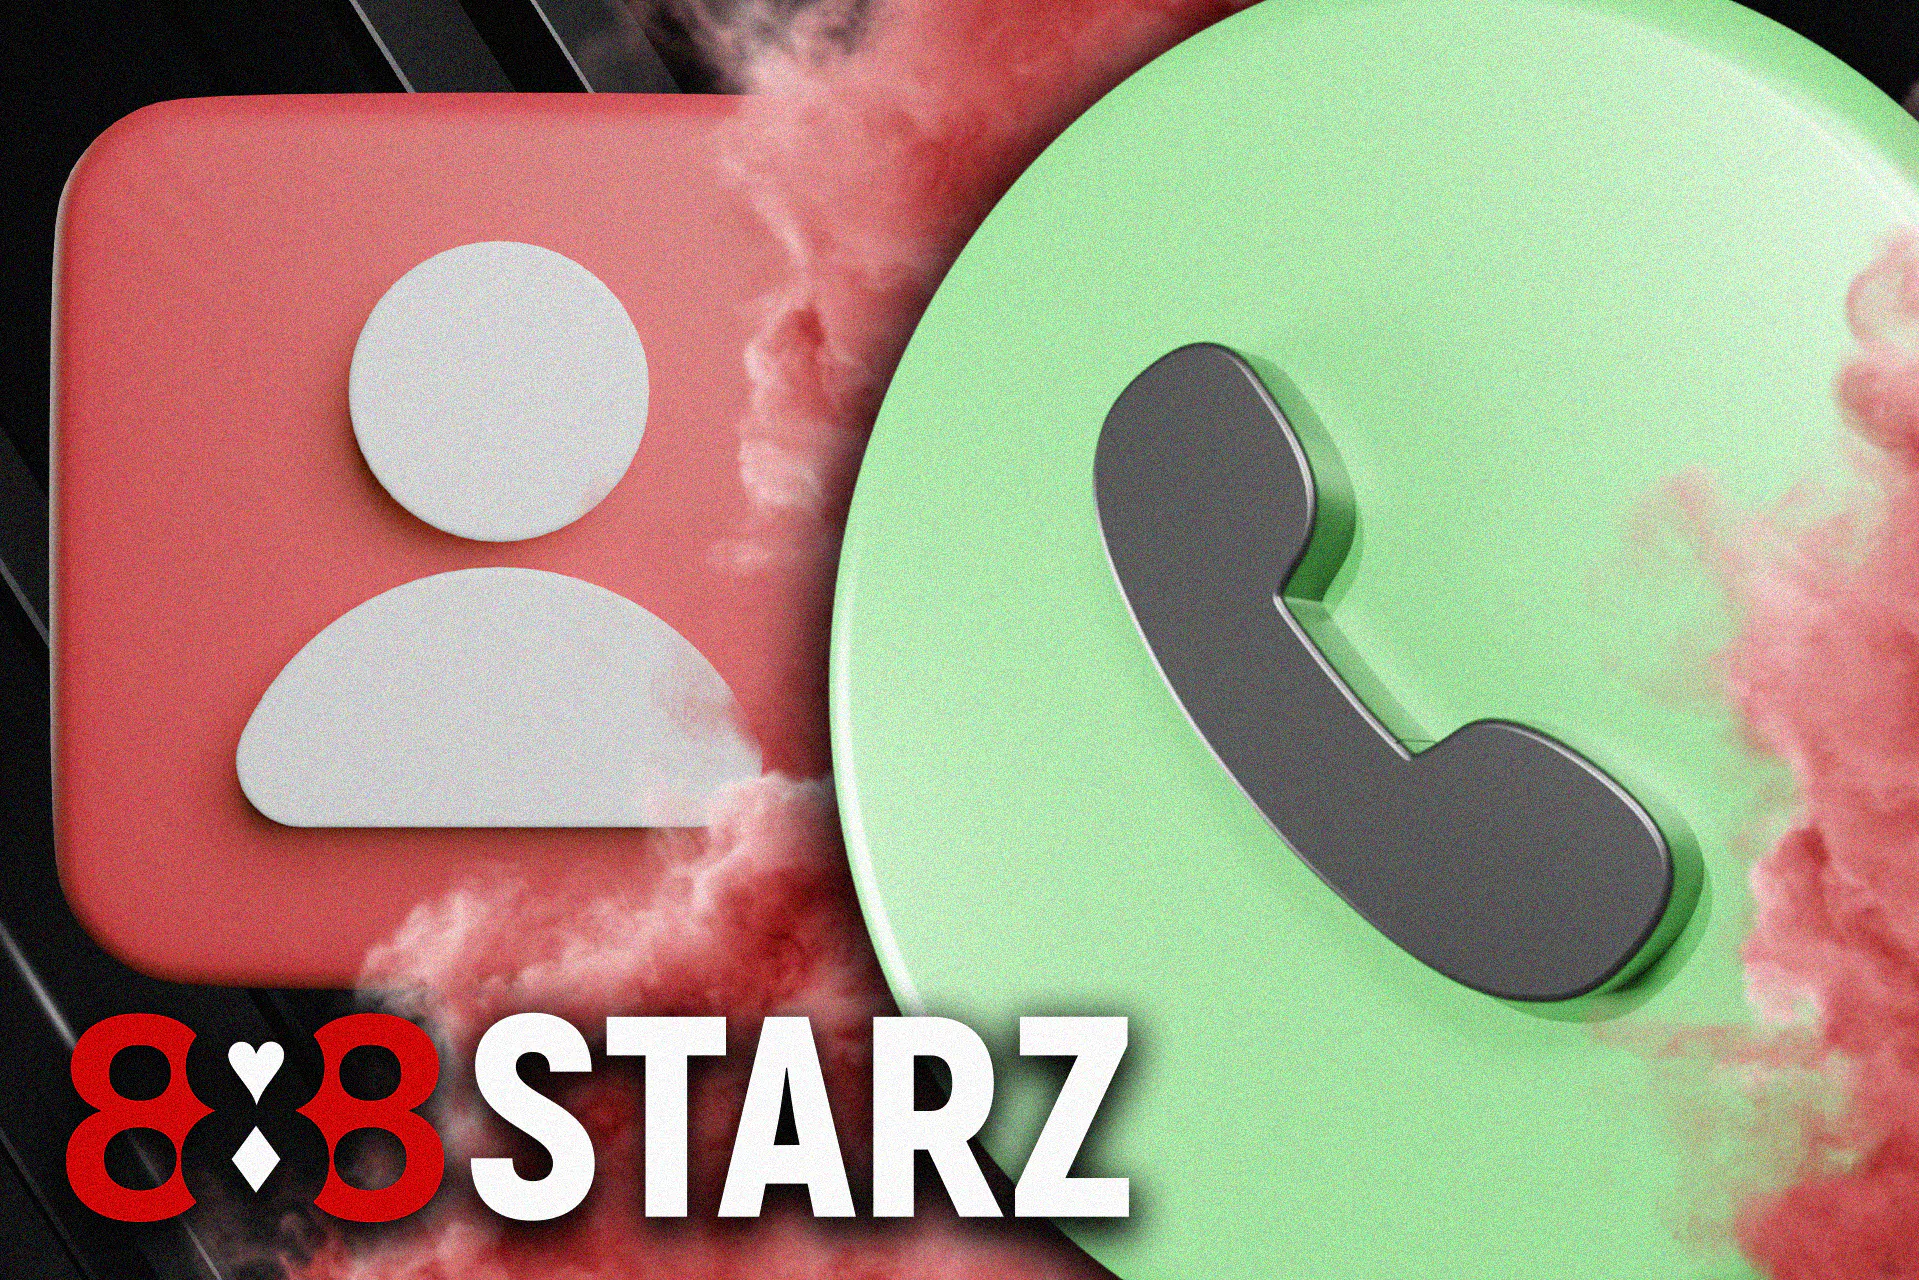 Call the 888starz support team to solve your betting problems.